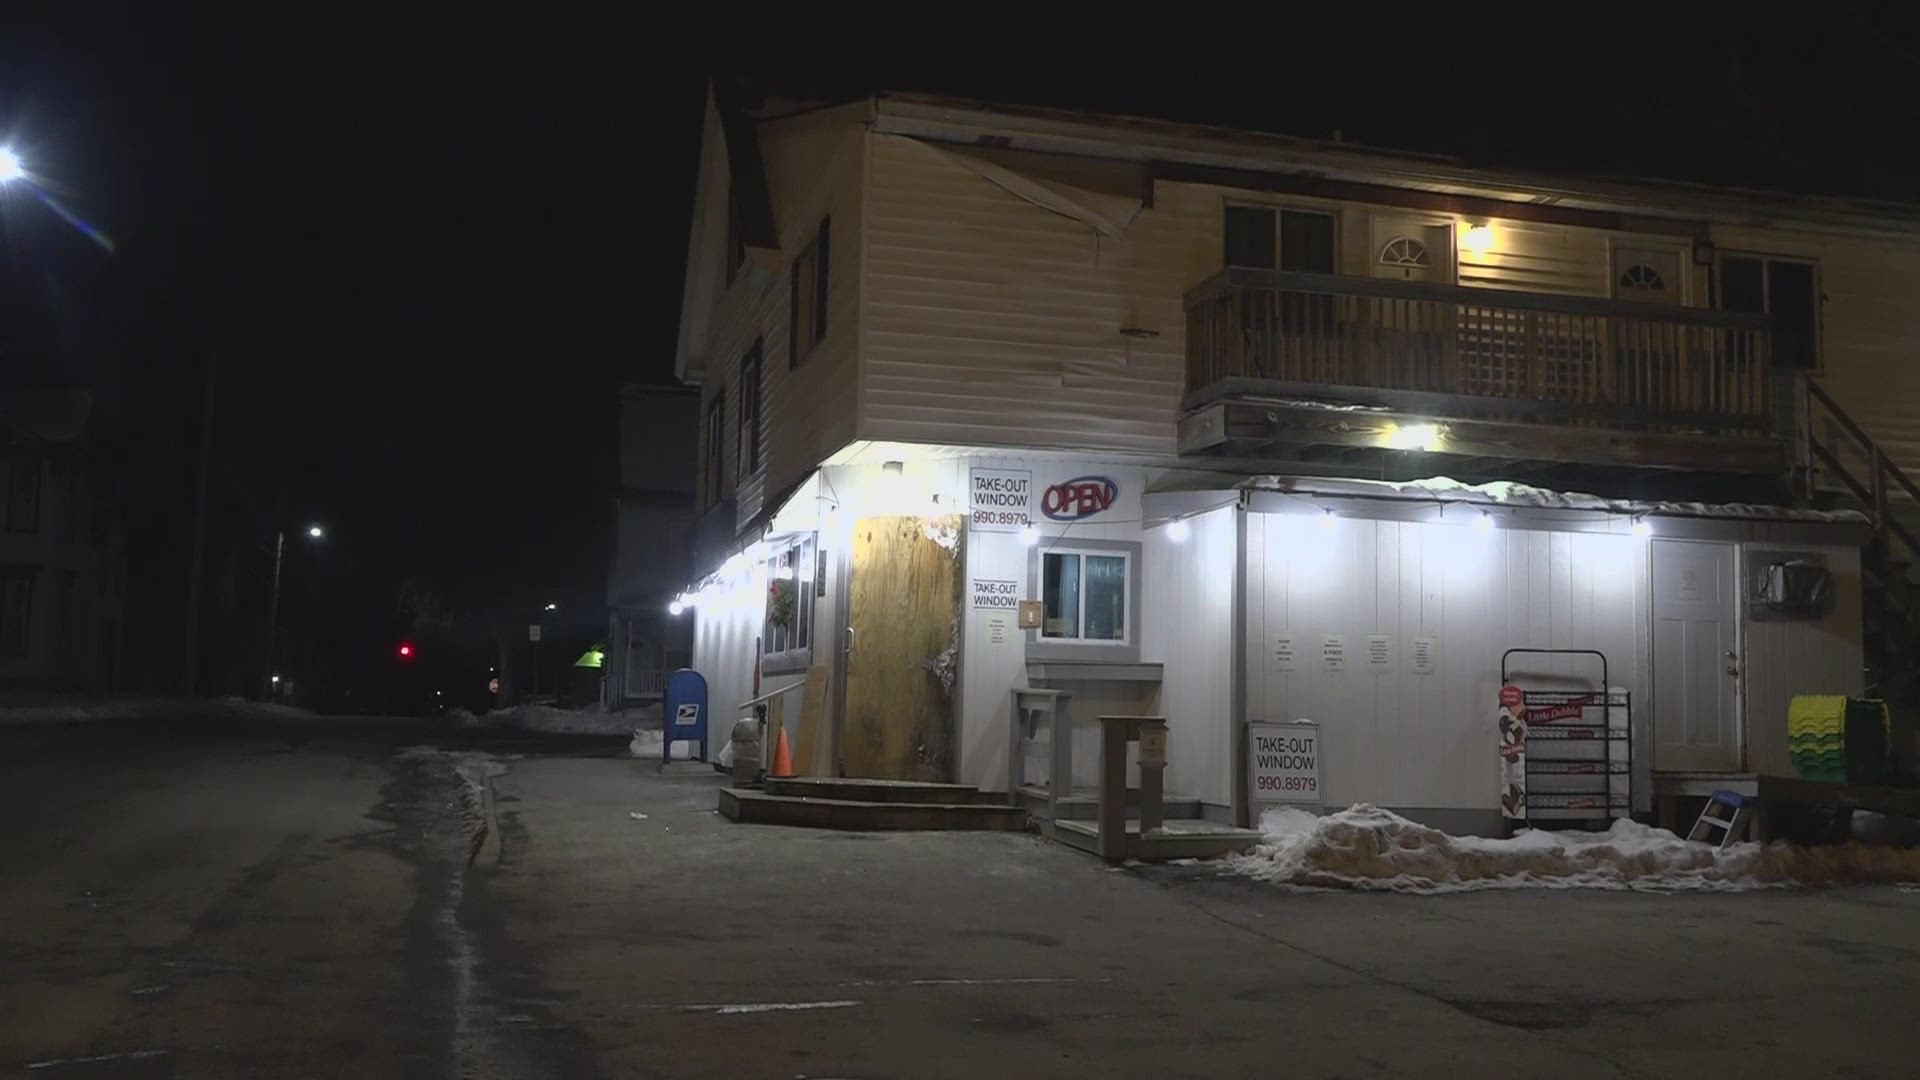 The Bangor business, Joe's Market, lost 15-hundred dollars worth of cash and merchandise after a break-in. Two people were involved in the break-in.